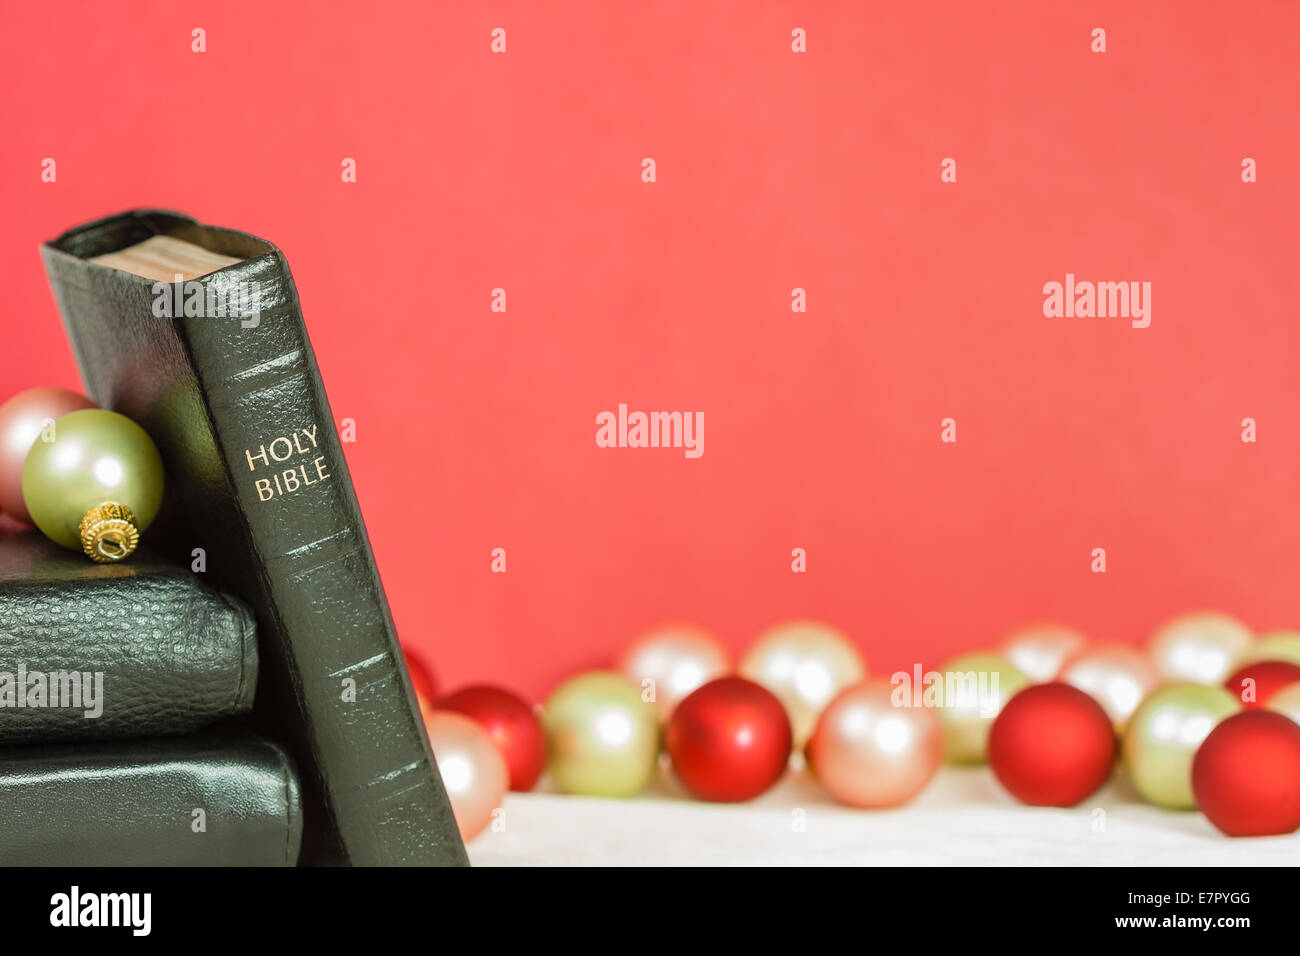 A sharply focused Holy Bible with Christmas ornaments against a red background. Can be used for Christmas Bible passages. Stock Photo